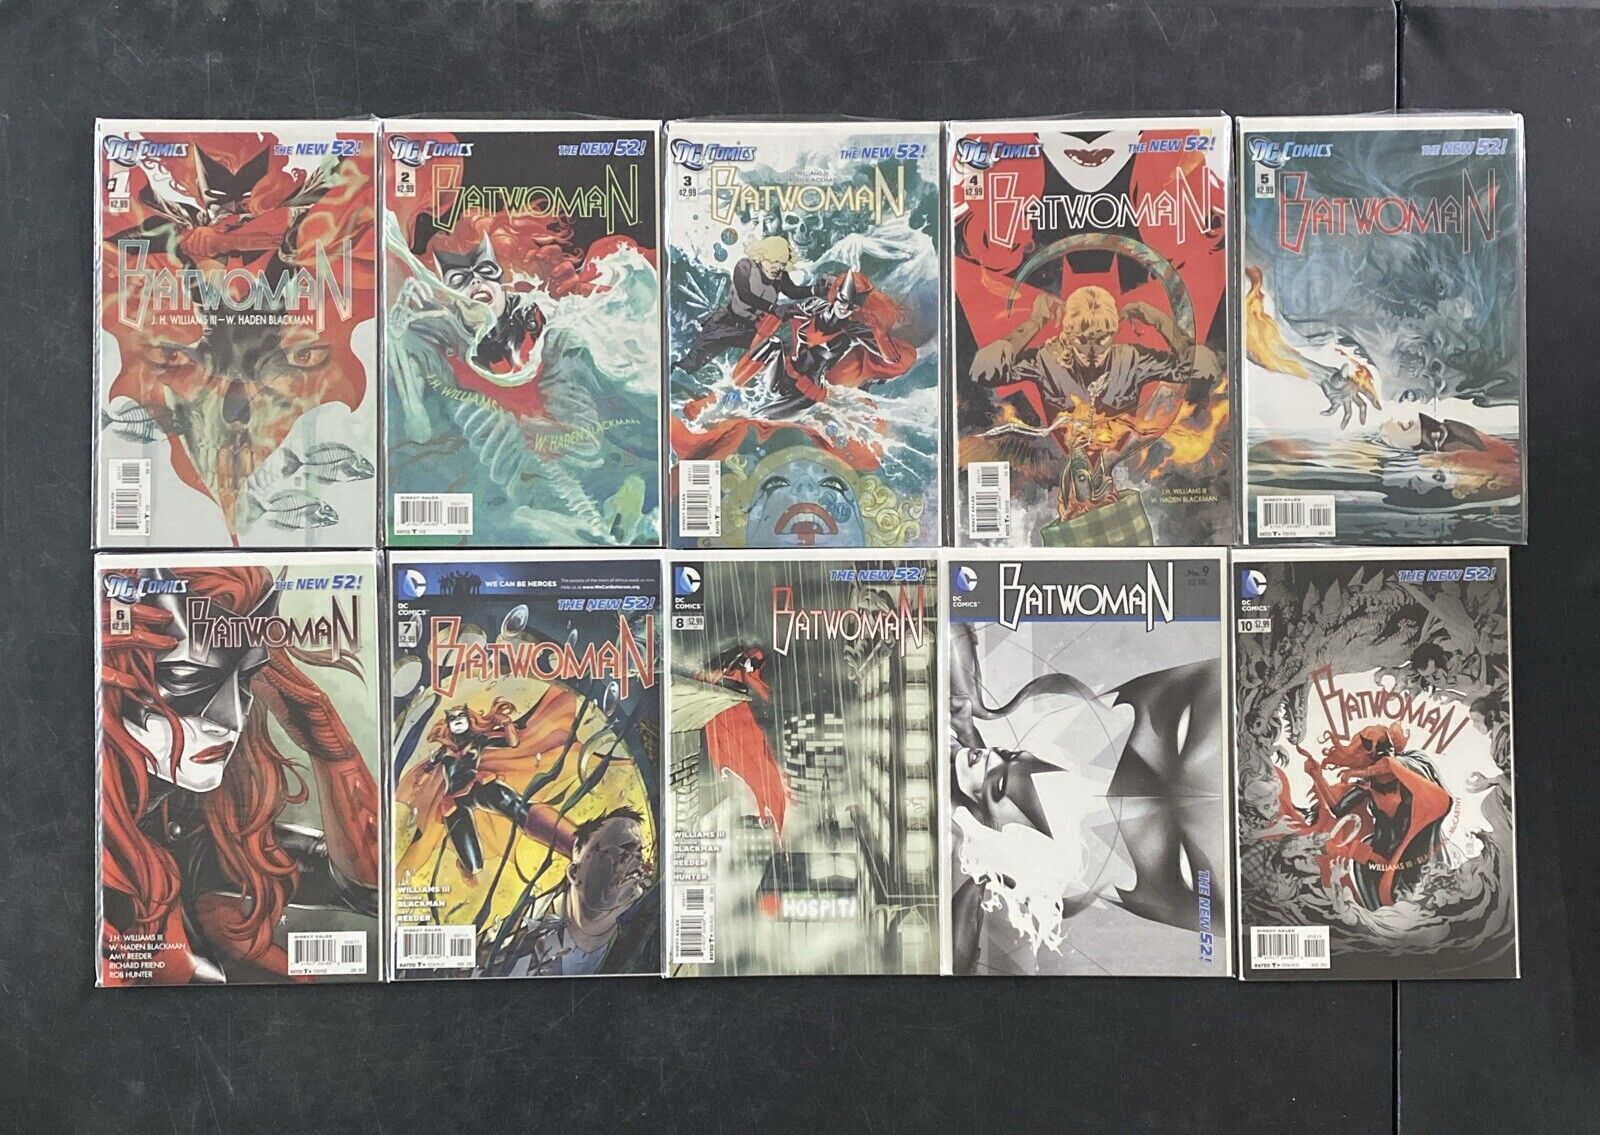 BATWOMAN Vol. 2 #1-40 LOT OF 21 (missing issues 22-40) 2011